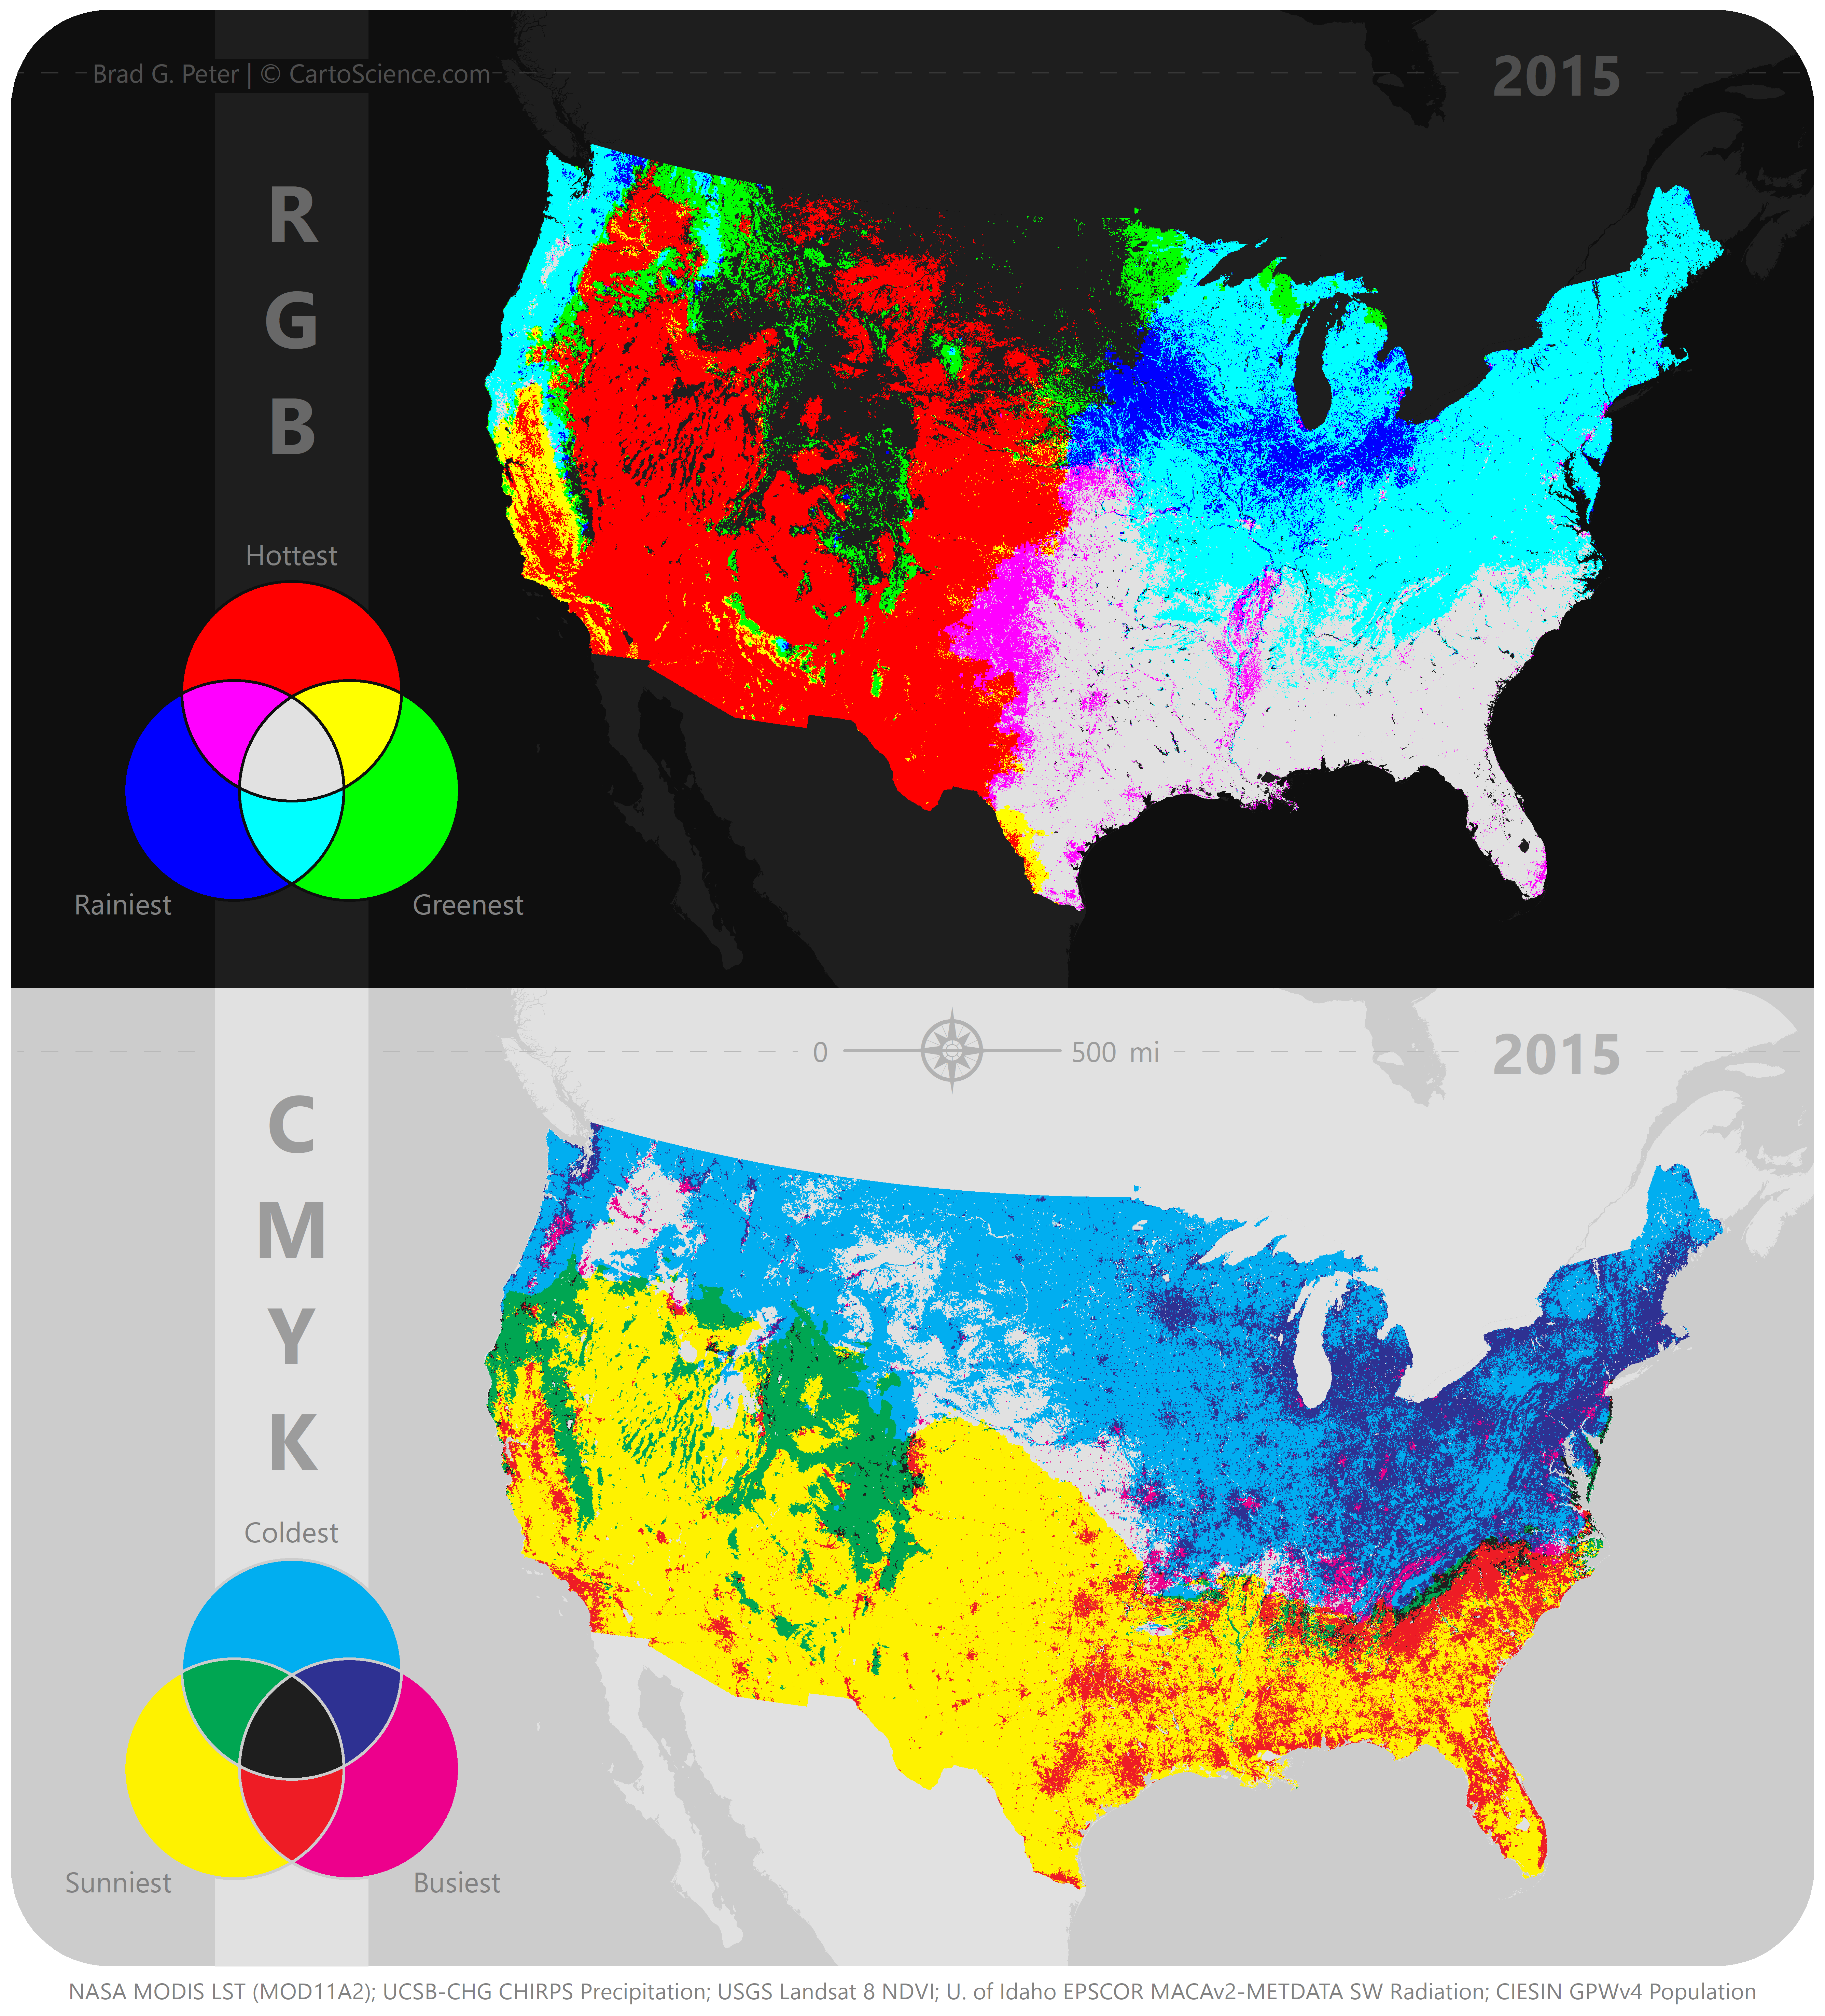 Maps of landscape characteristics across the U.S. using RGB and CMYK color palettes.